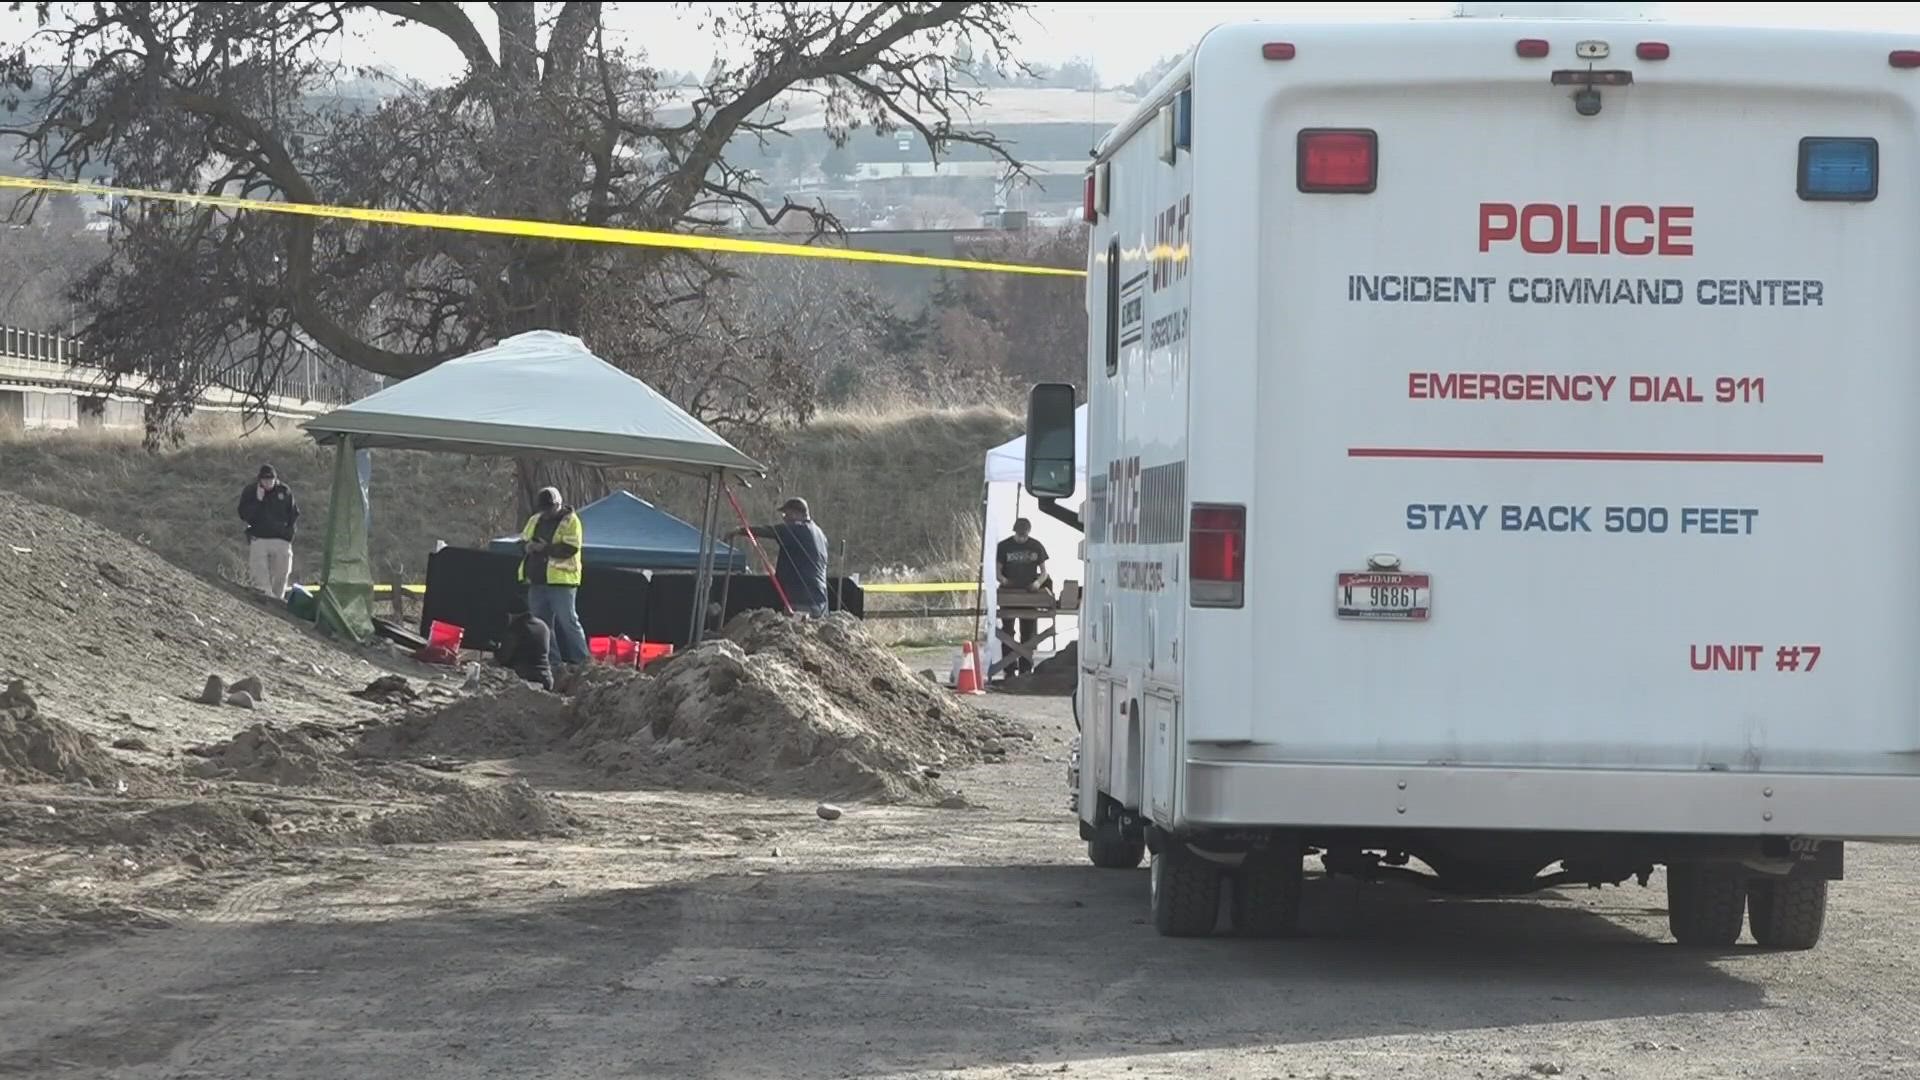 The Lewiston Police Department has confirmed that the remains found in North Lewiston are human.